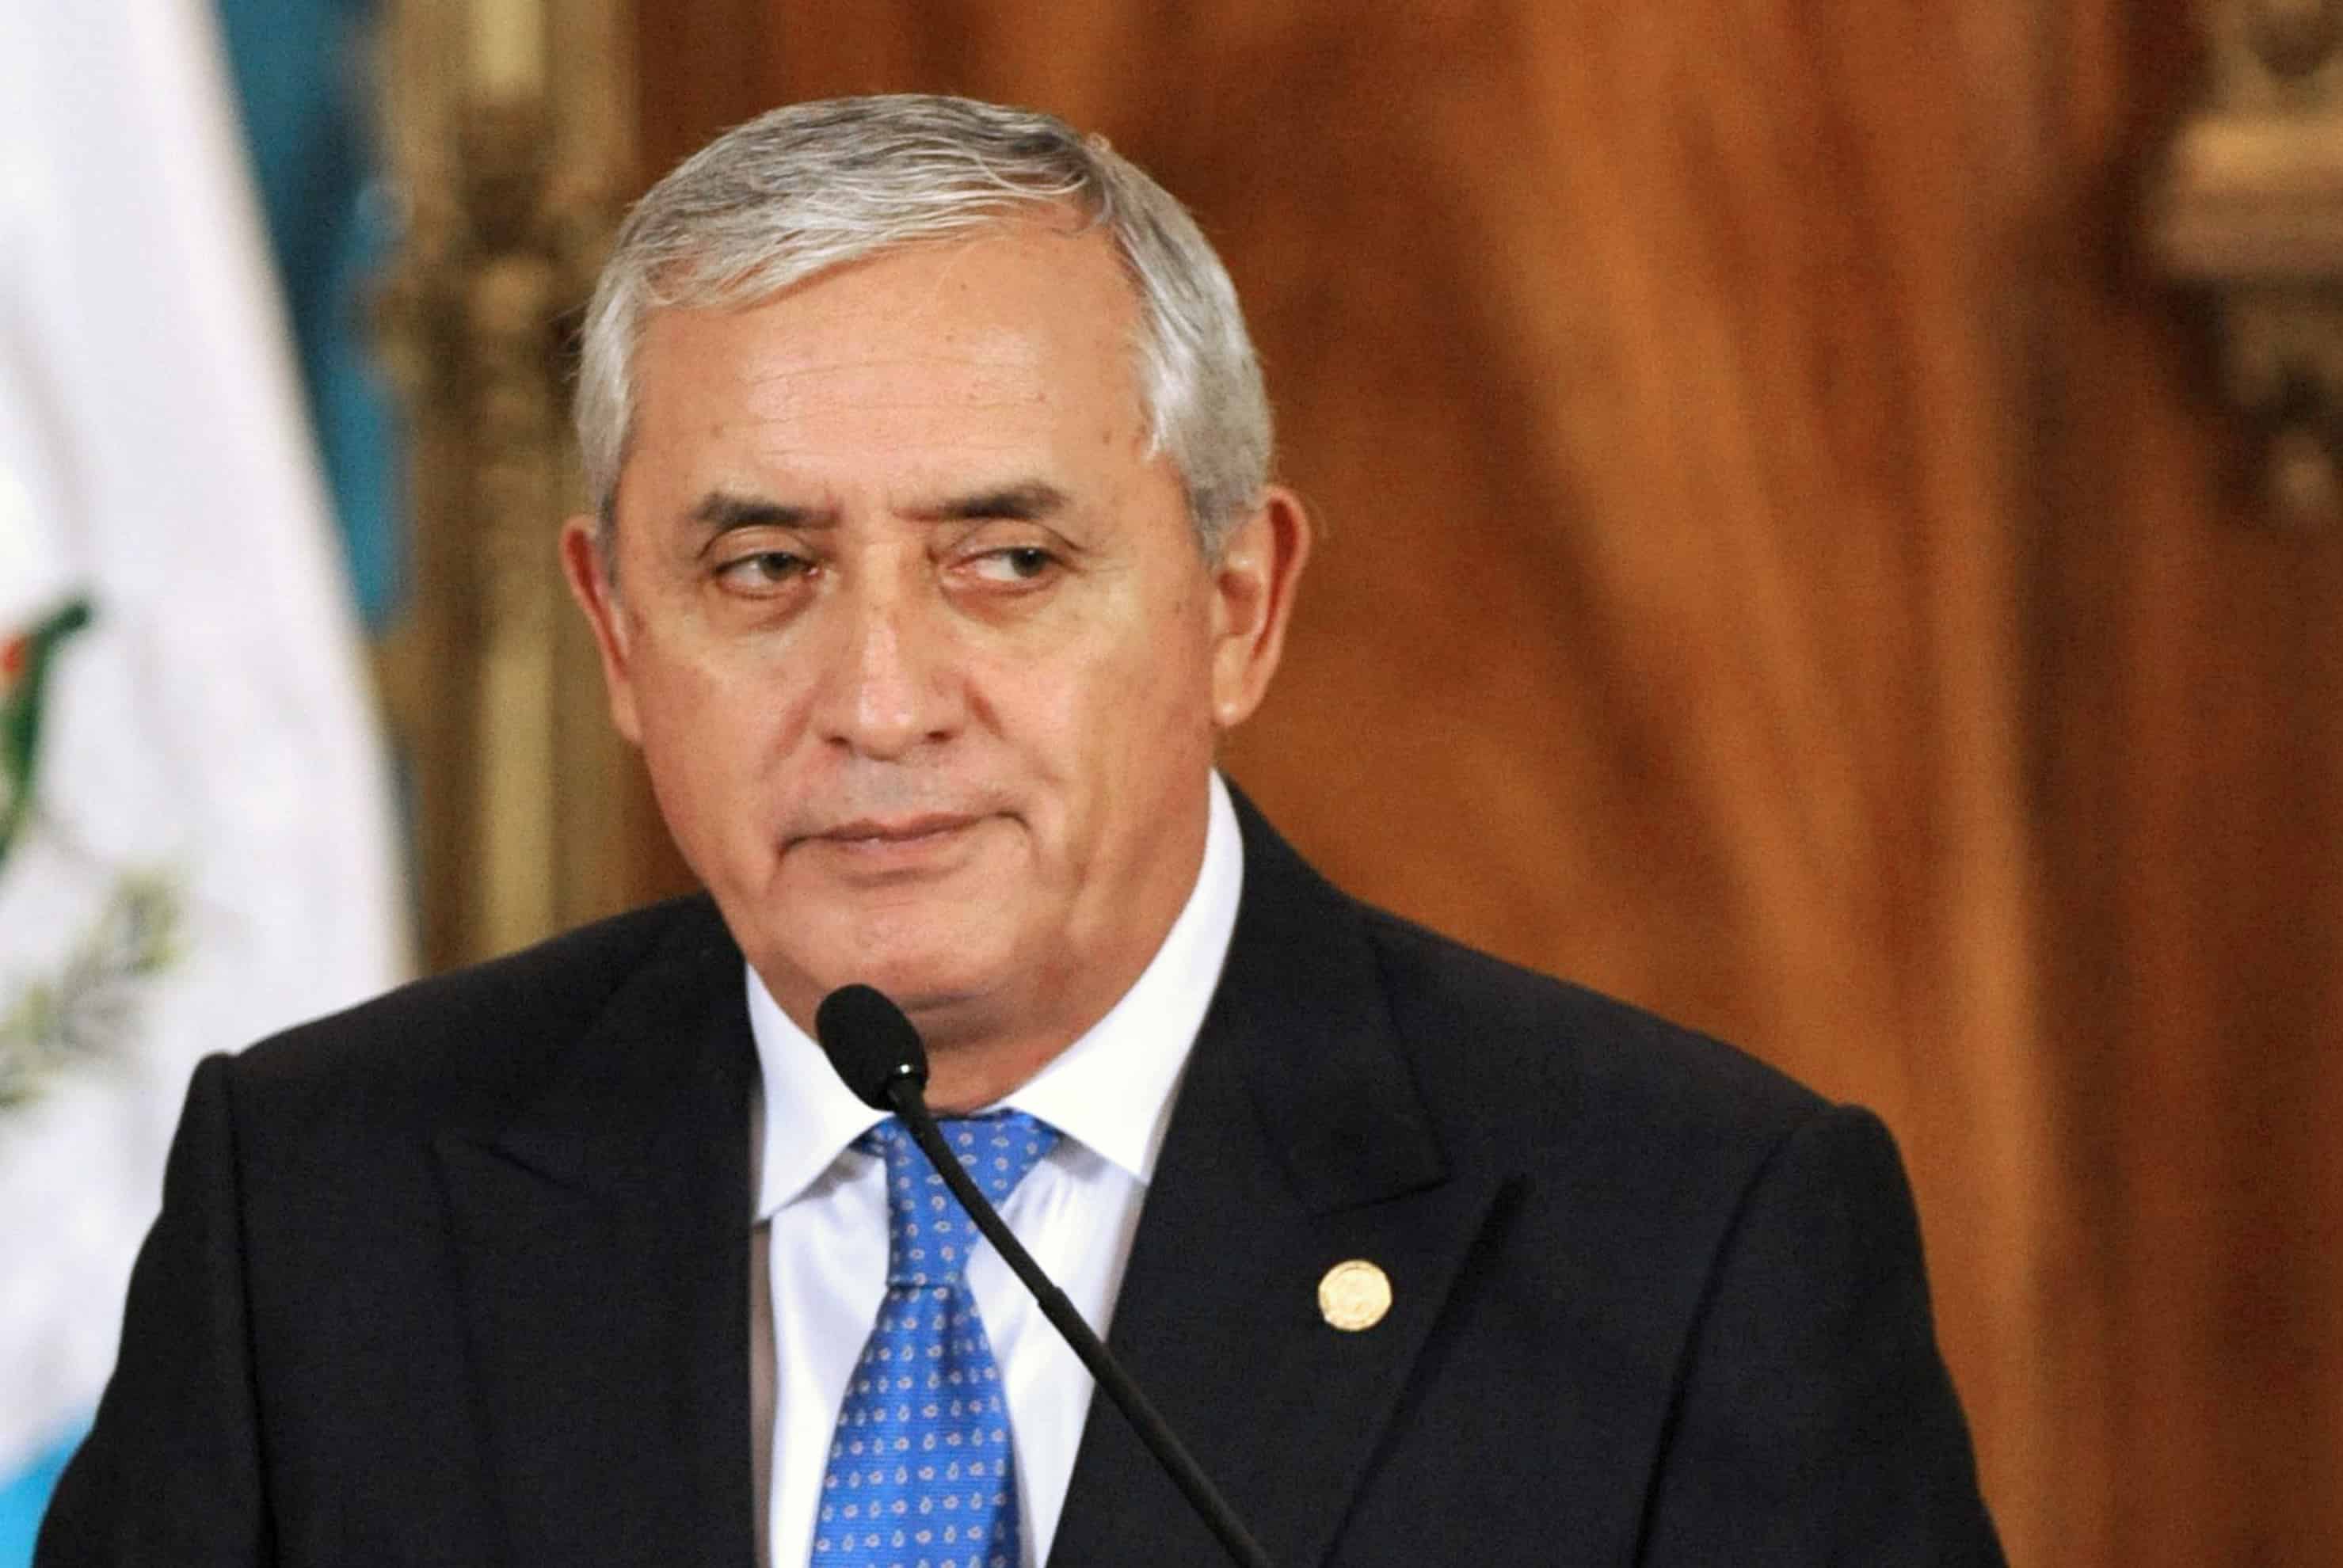 Guatemalan President Otto Pérez Molina speaks at a news conference at the presidential palace in Guatemala City, on Aug. 31, 2015.